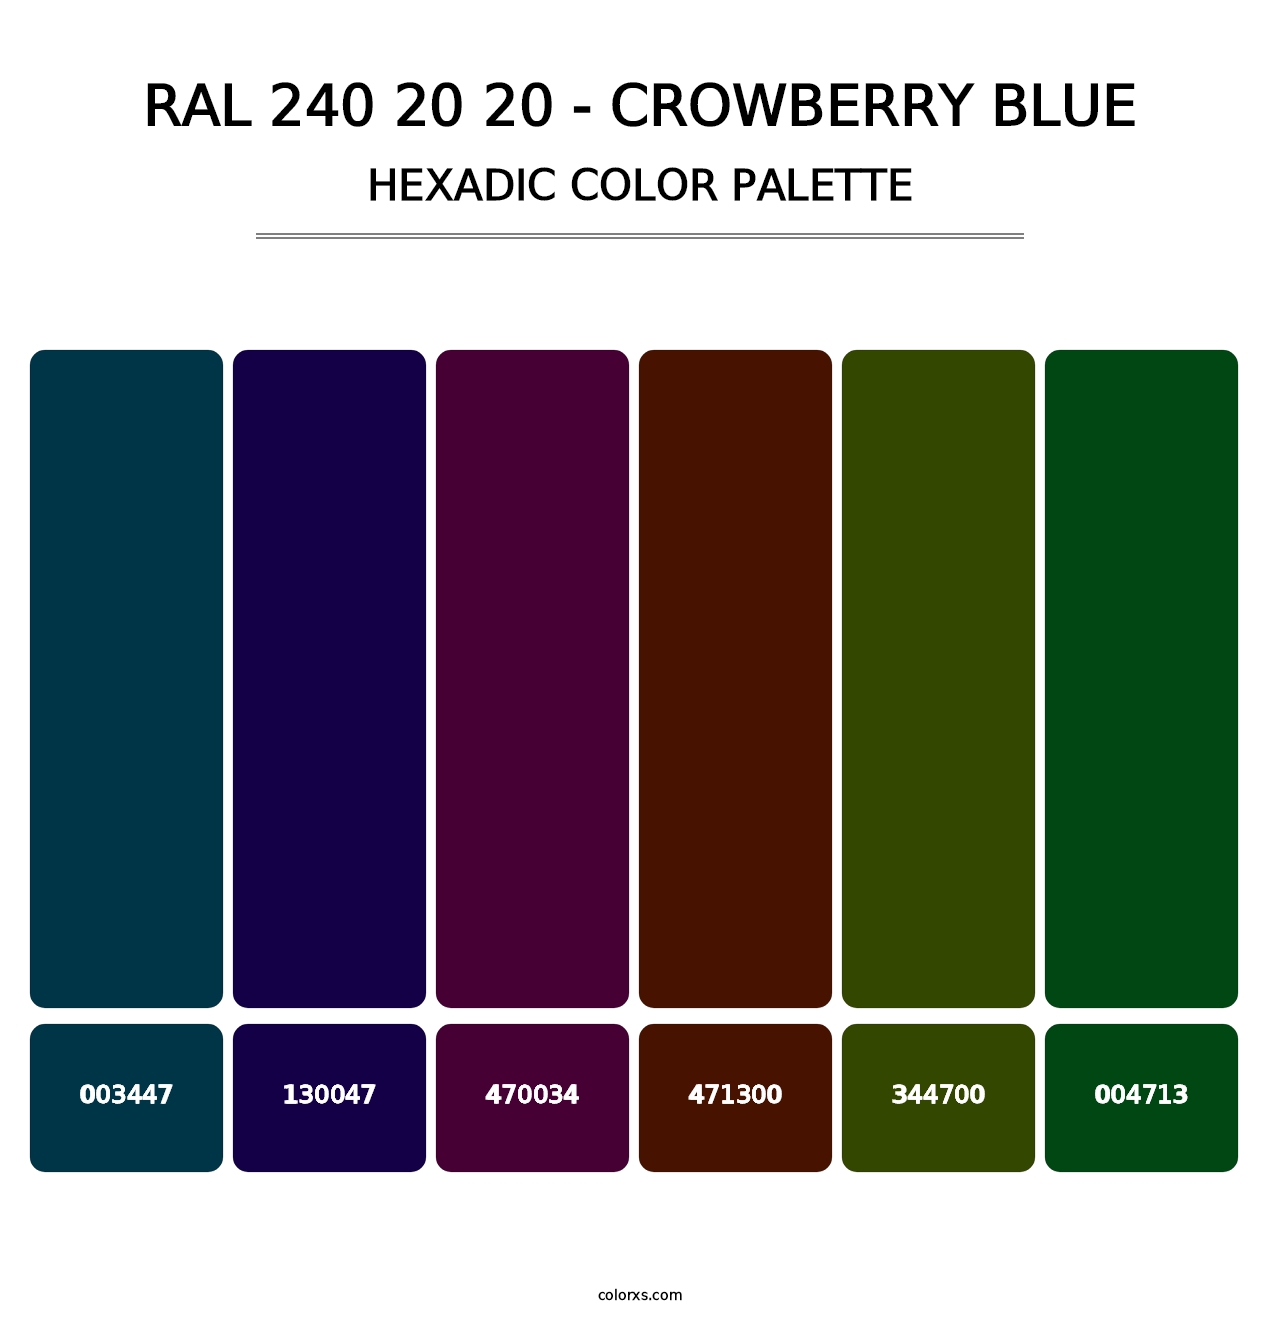 RAL 240 20 20 - Crowberry Blue - Hexadic Color Palette